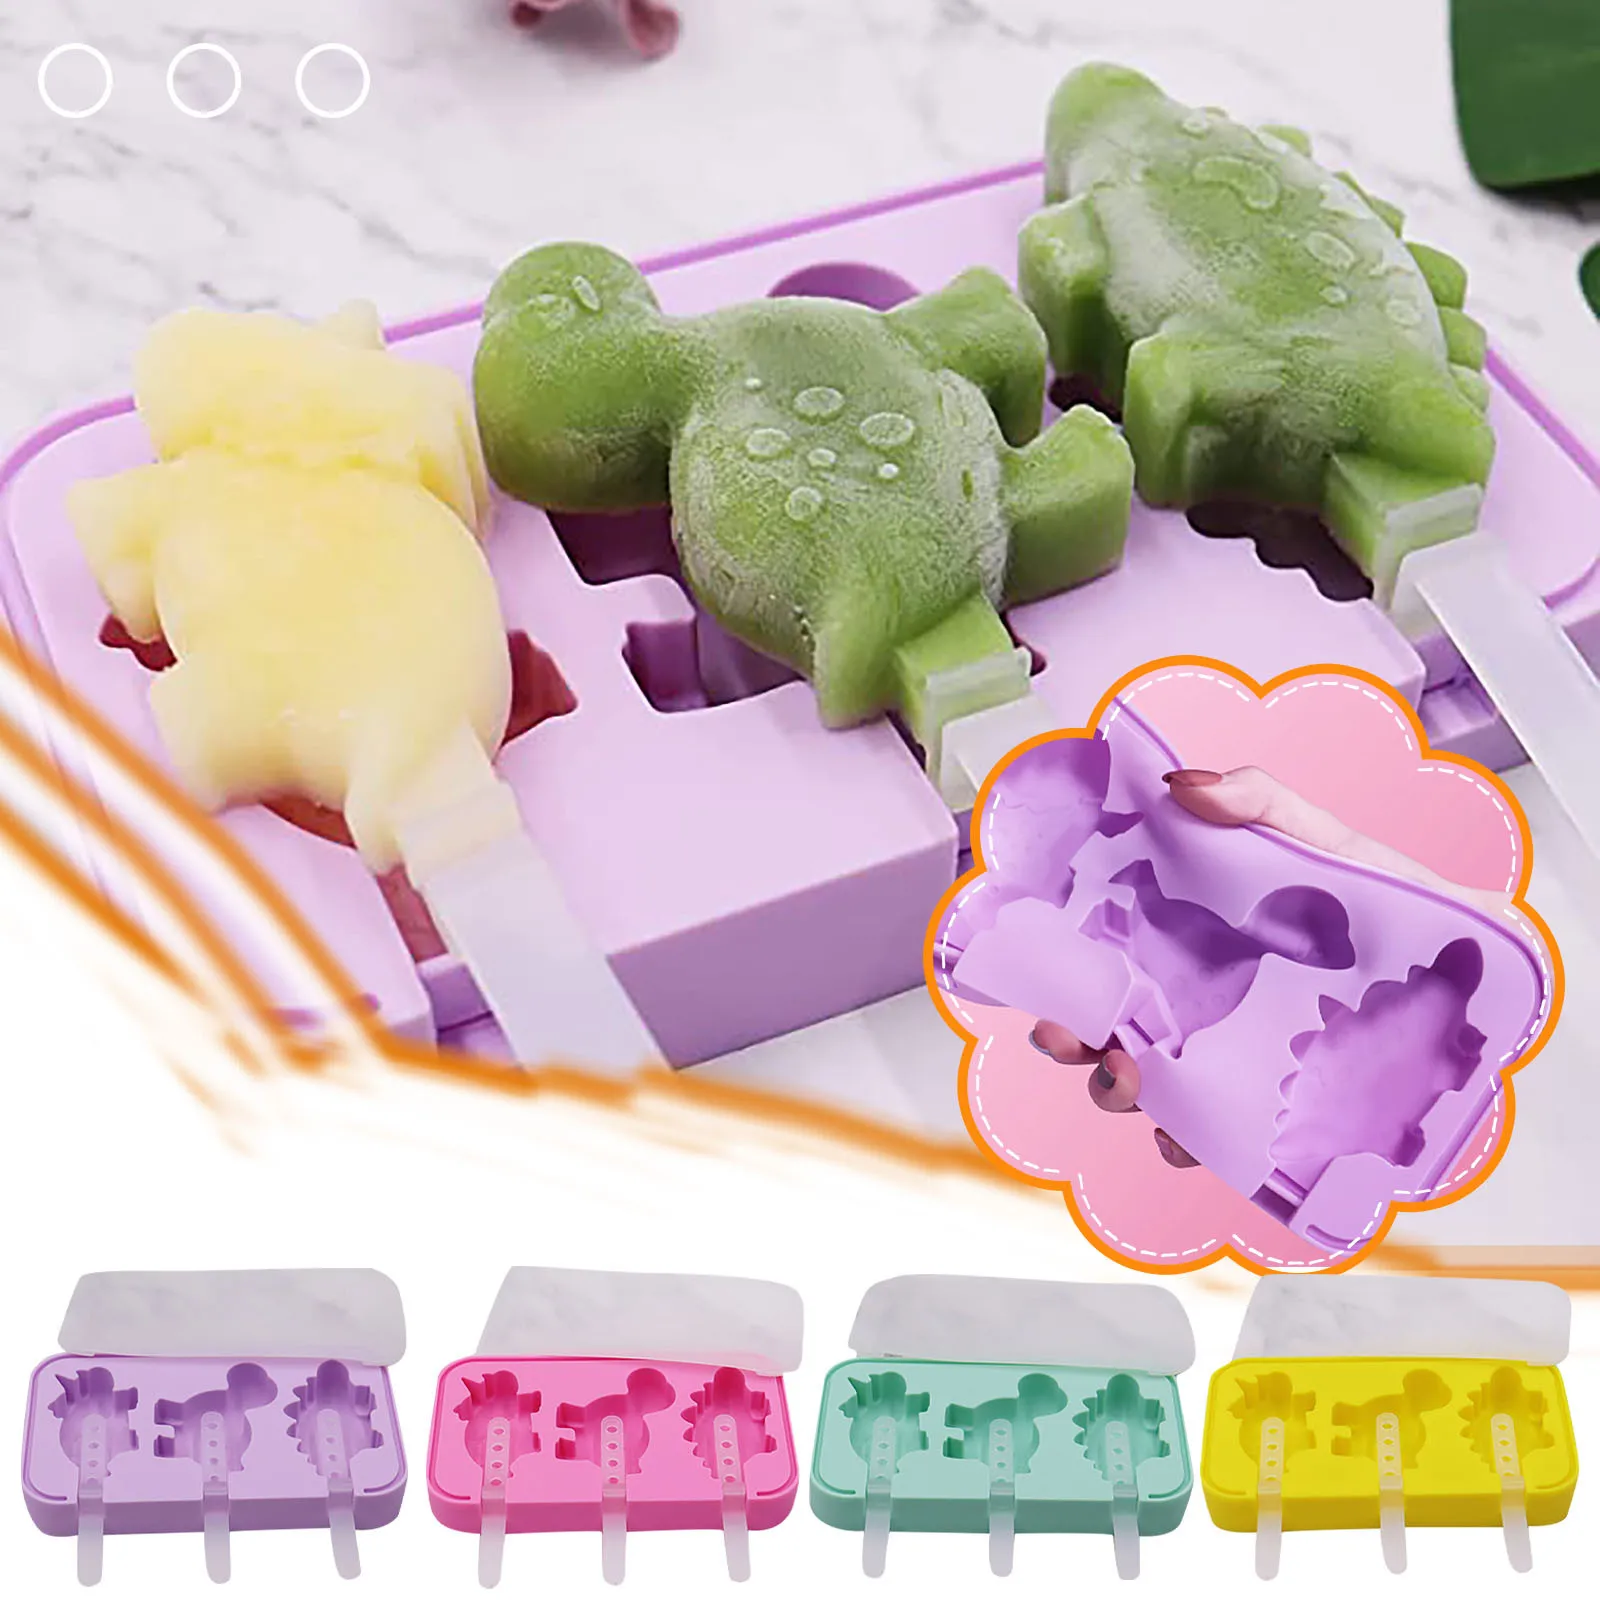 6pc Silicone Ice Cream Mold Ice Cube DIY Lolly Mold Popsicle Maker Kitchen 